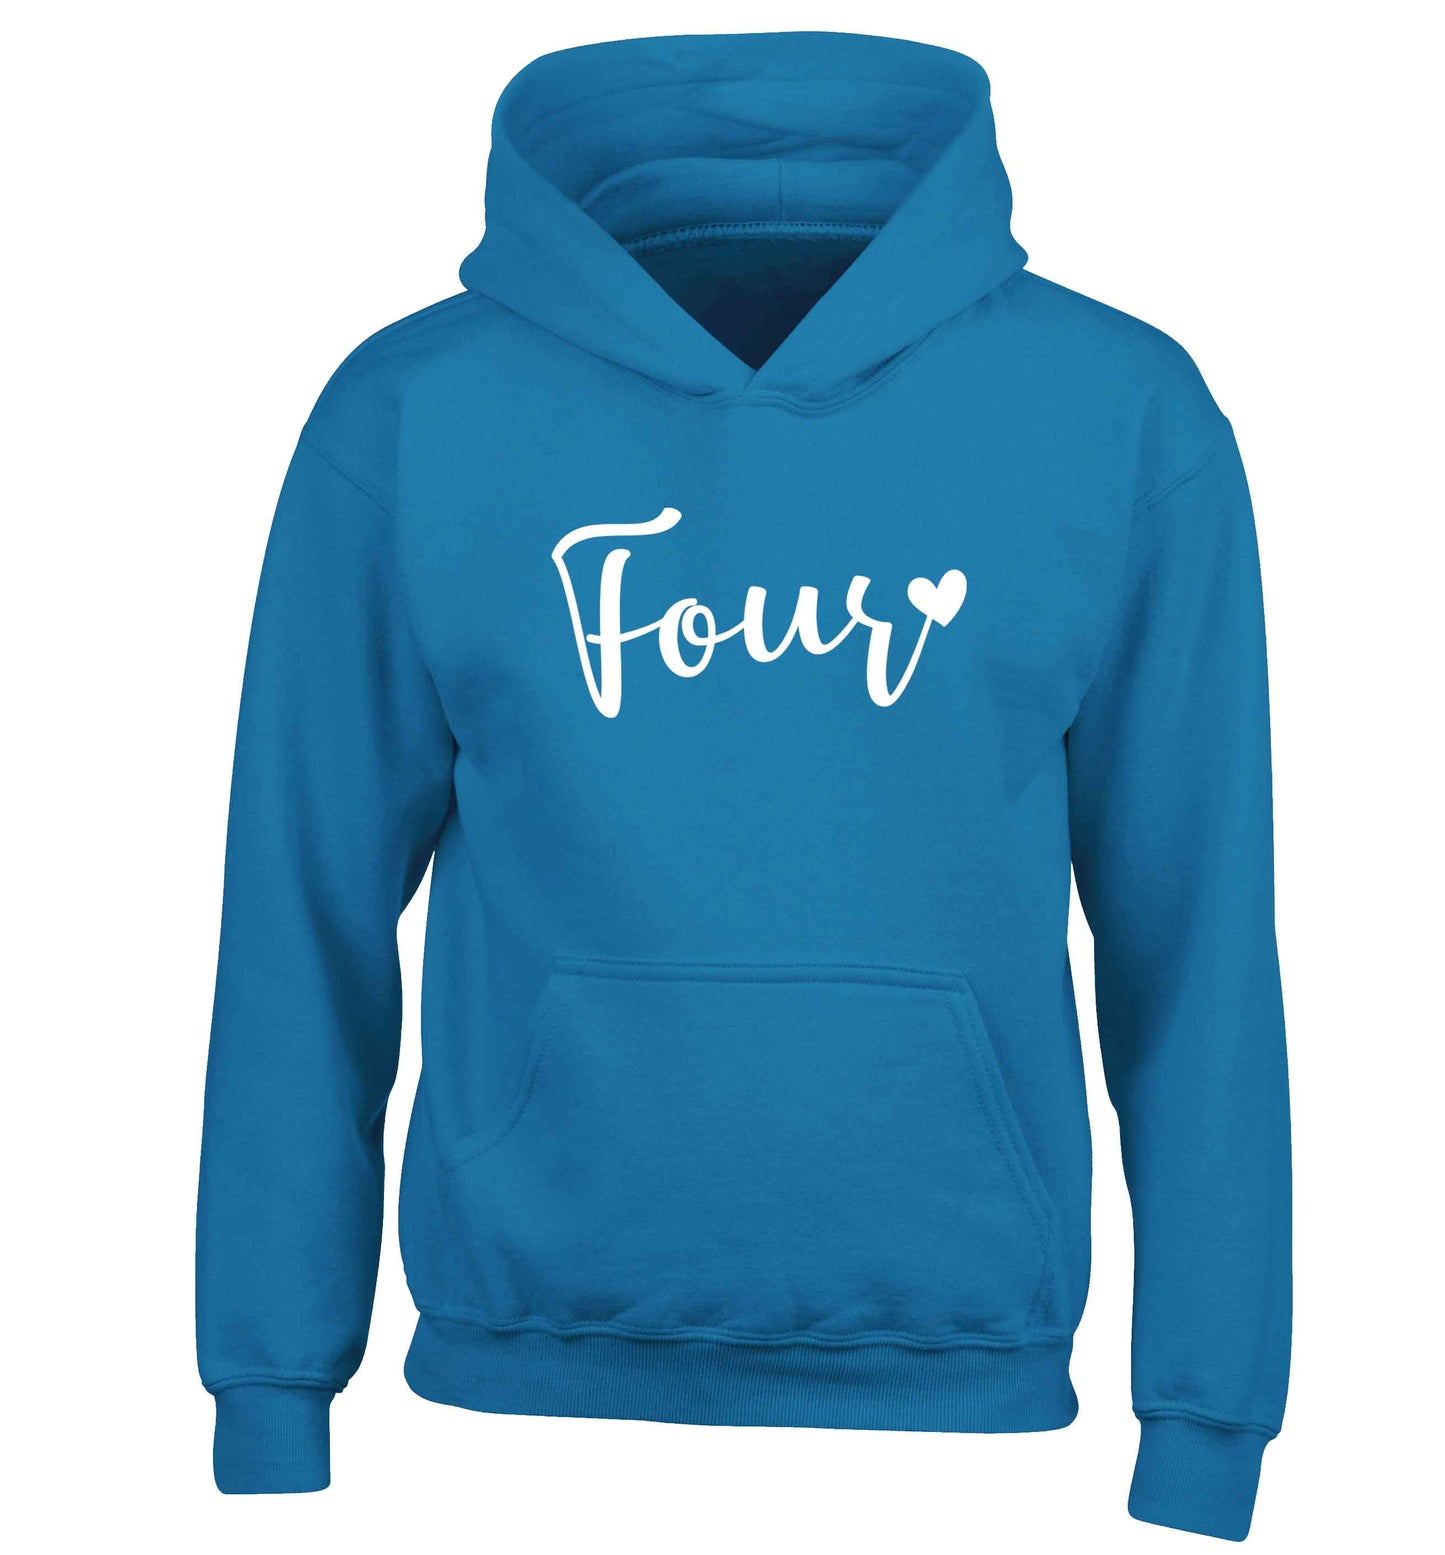 Four and heart children's blue hoodie 12-13 Years